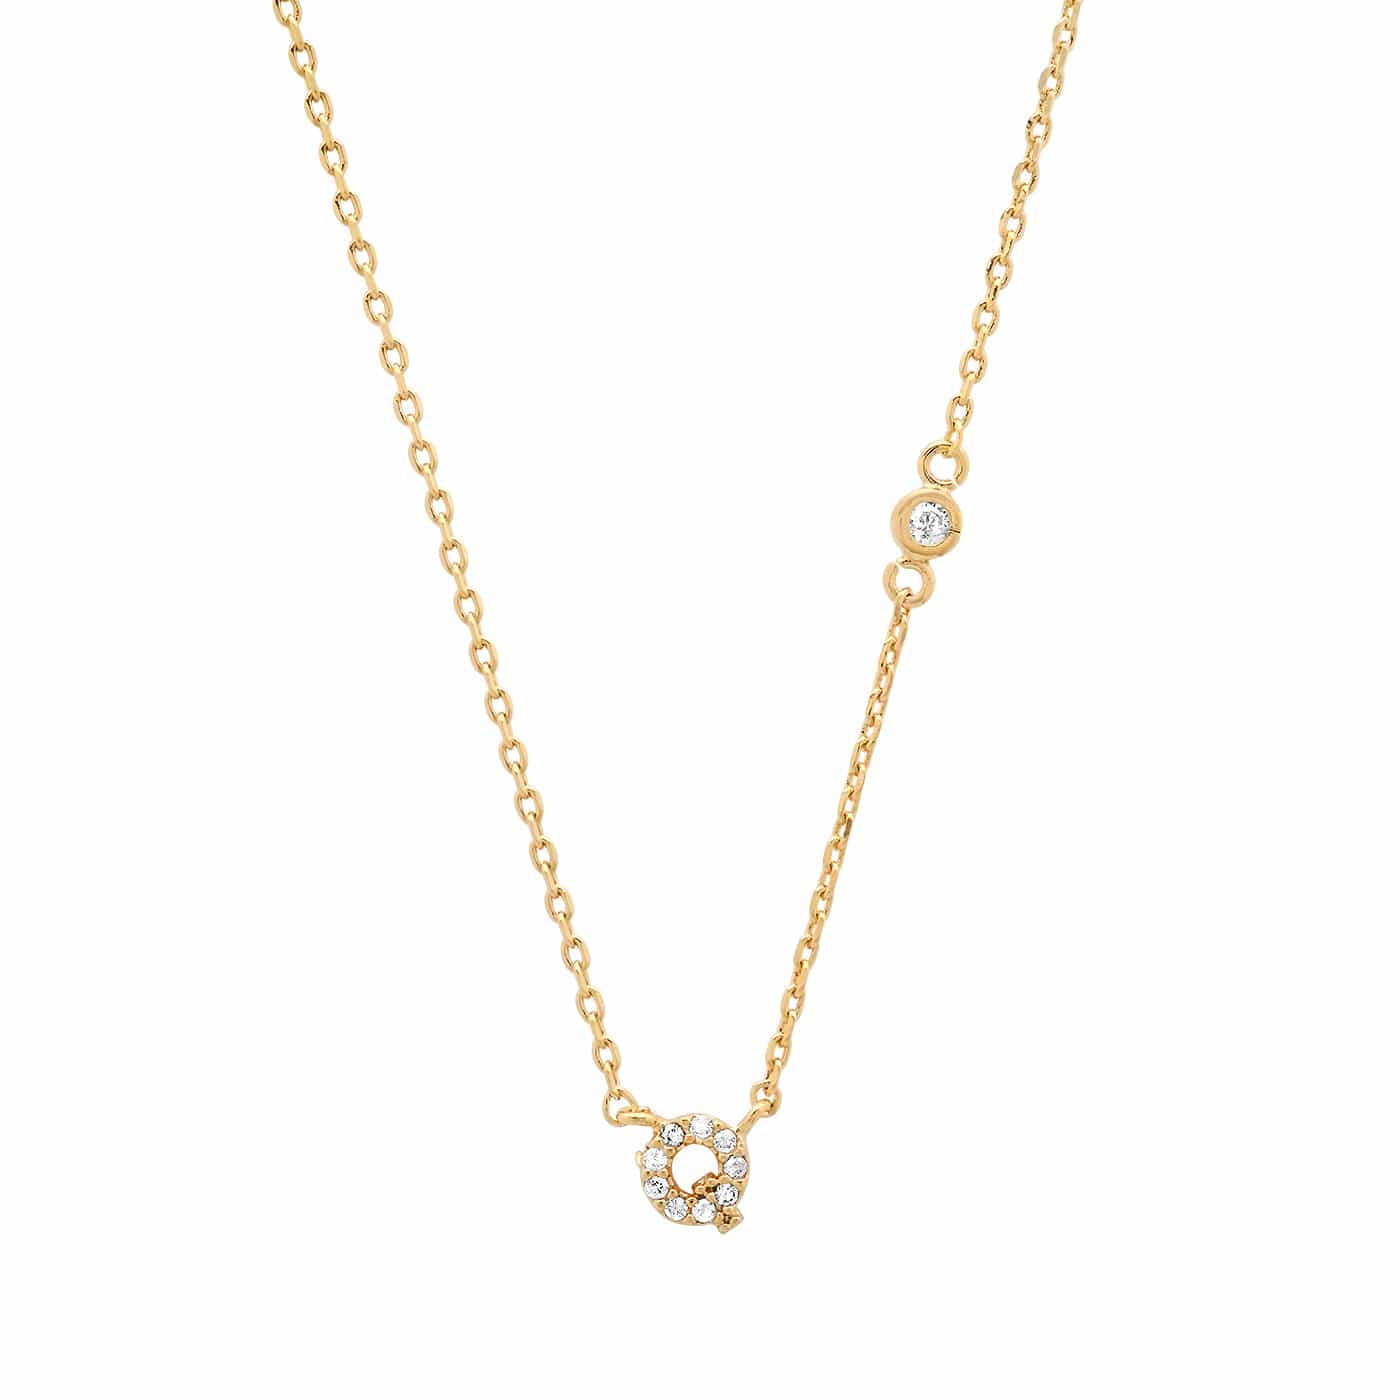 TAI JEWELRY Necklace Gold / Q CZ Initial Necklace